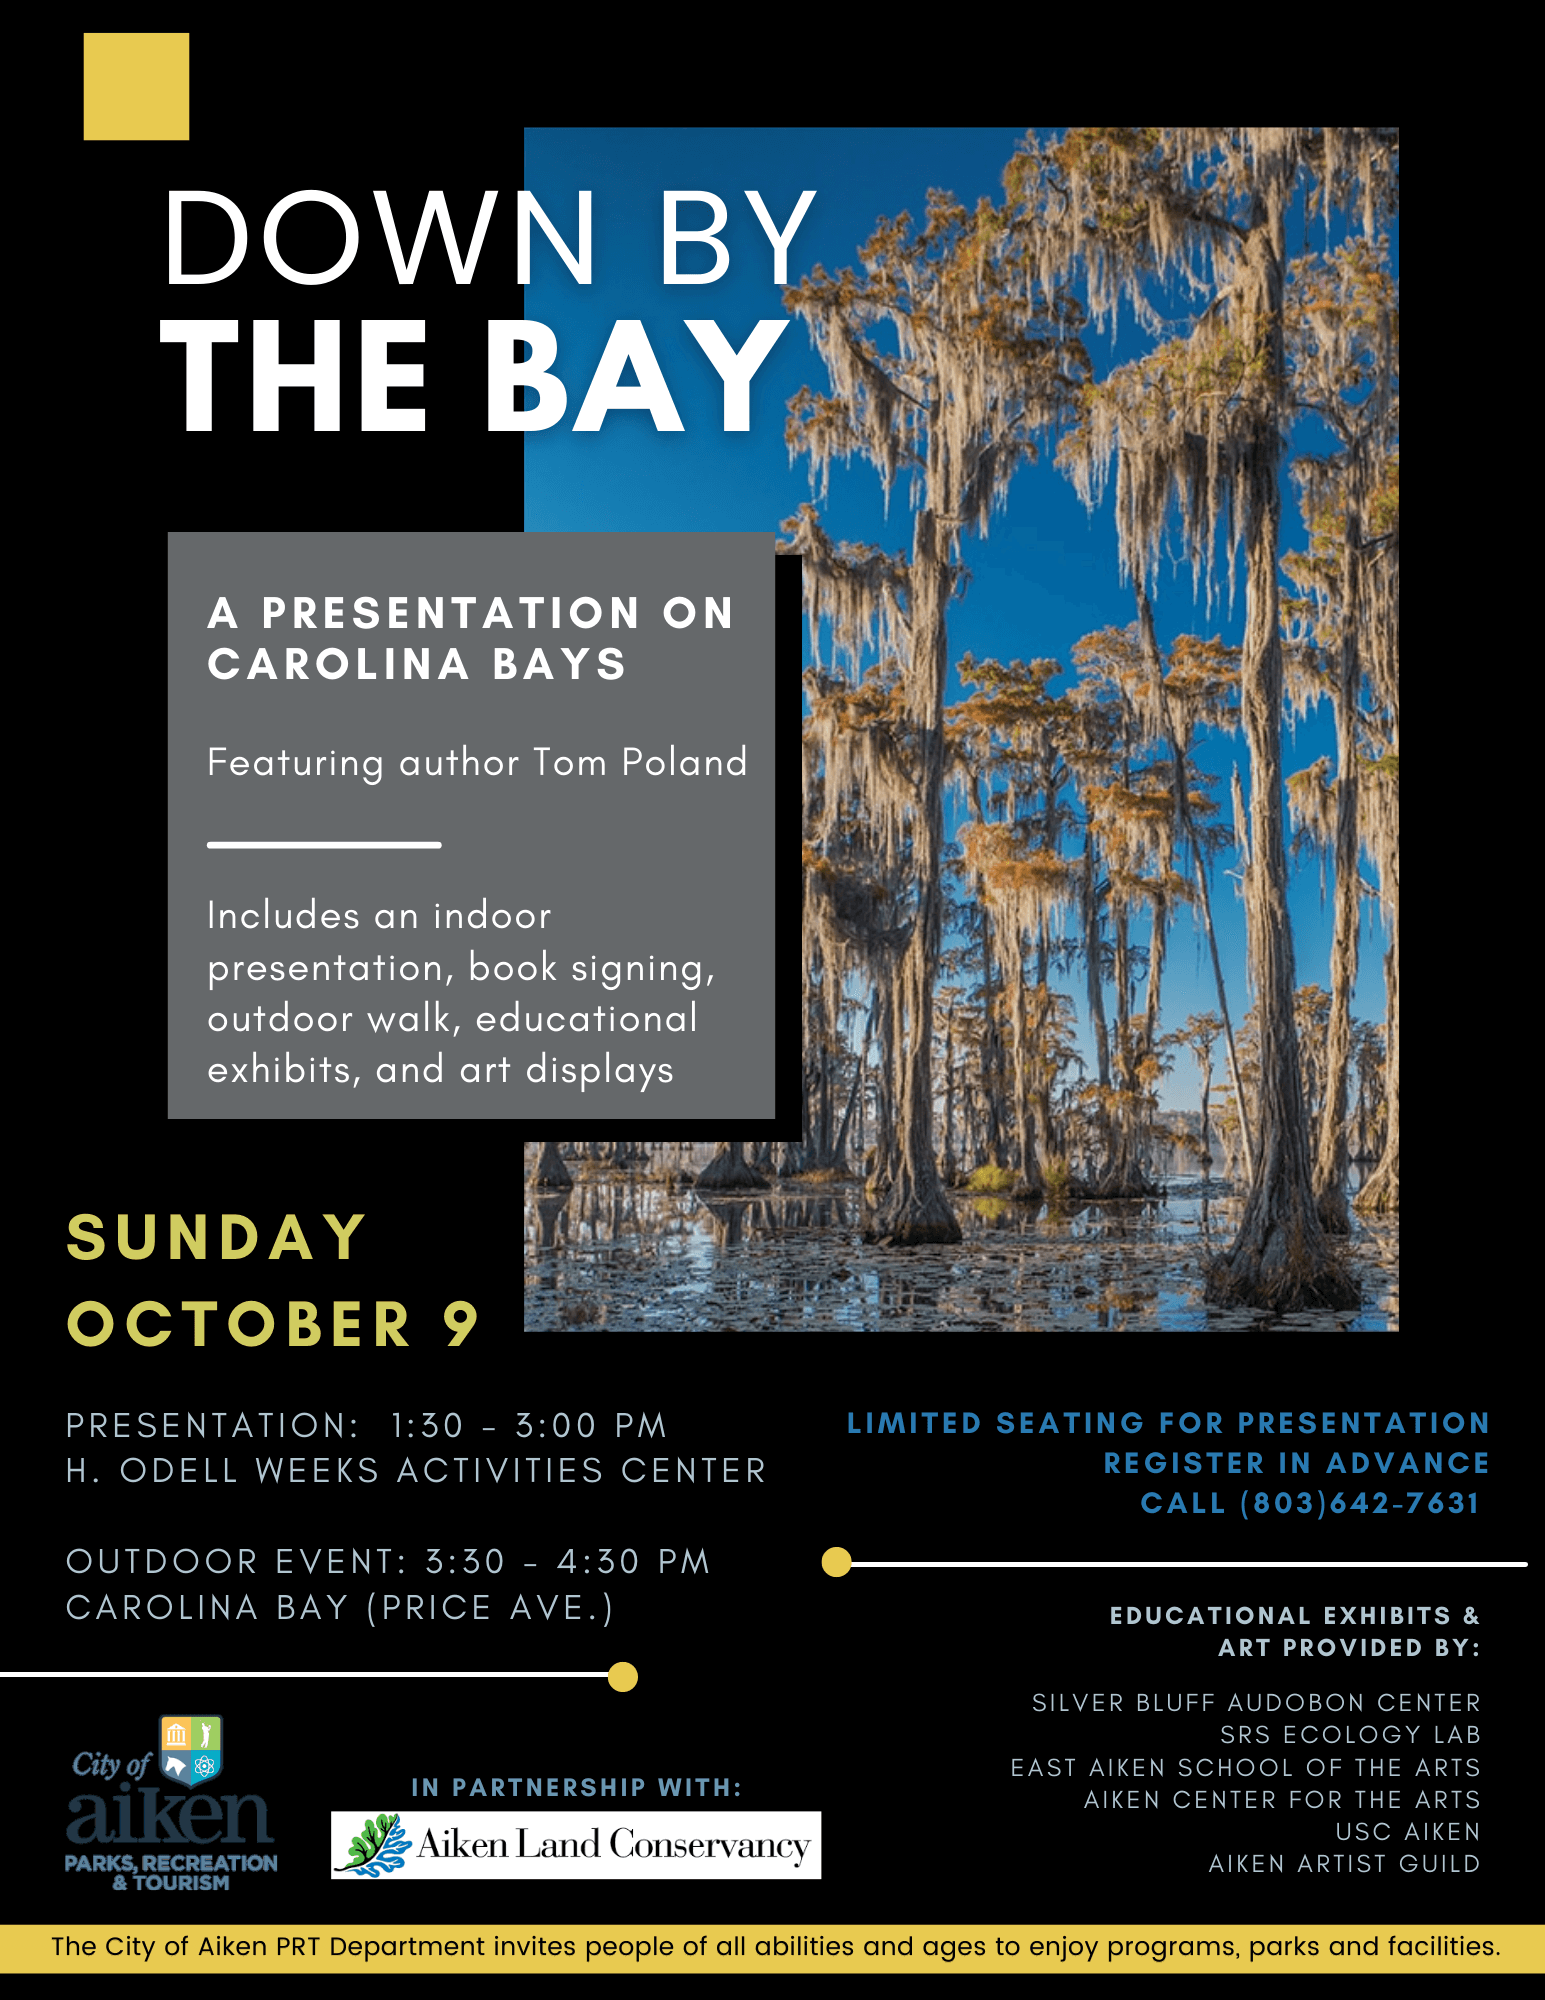 Down by the bay invite